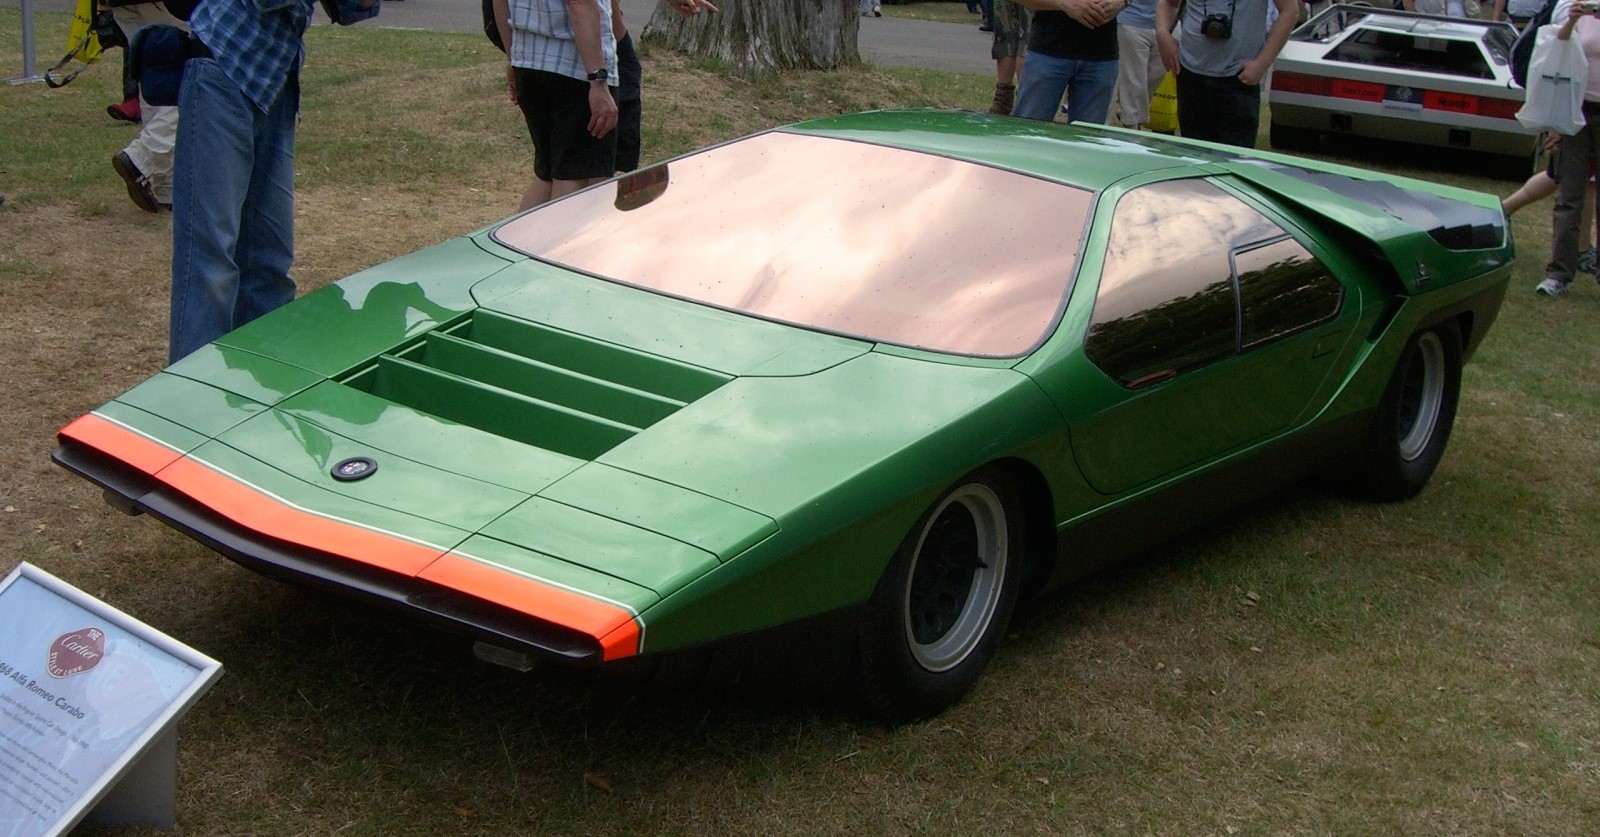 Here are 5 Concept Cars that everyone forgot about